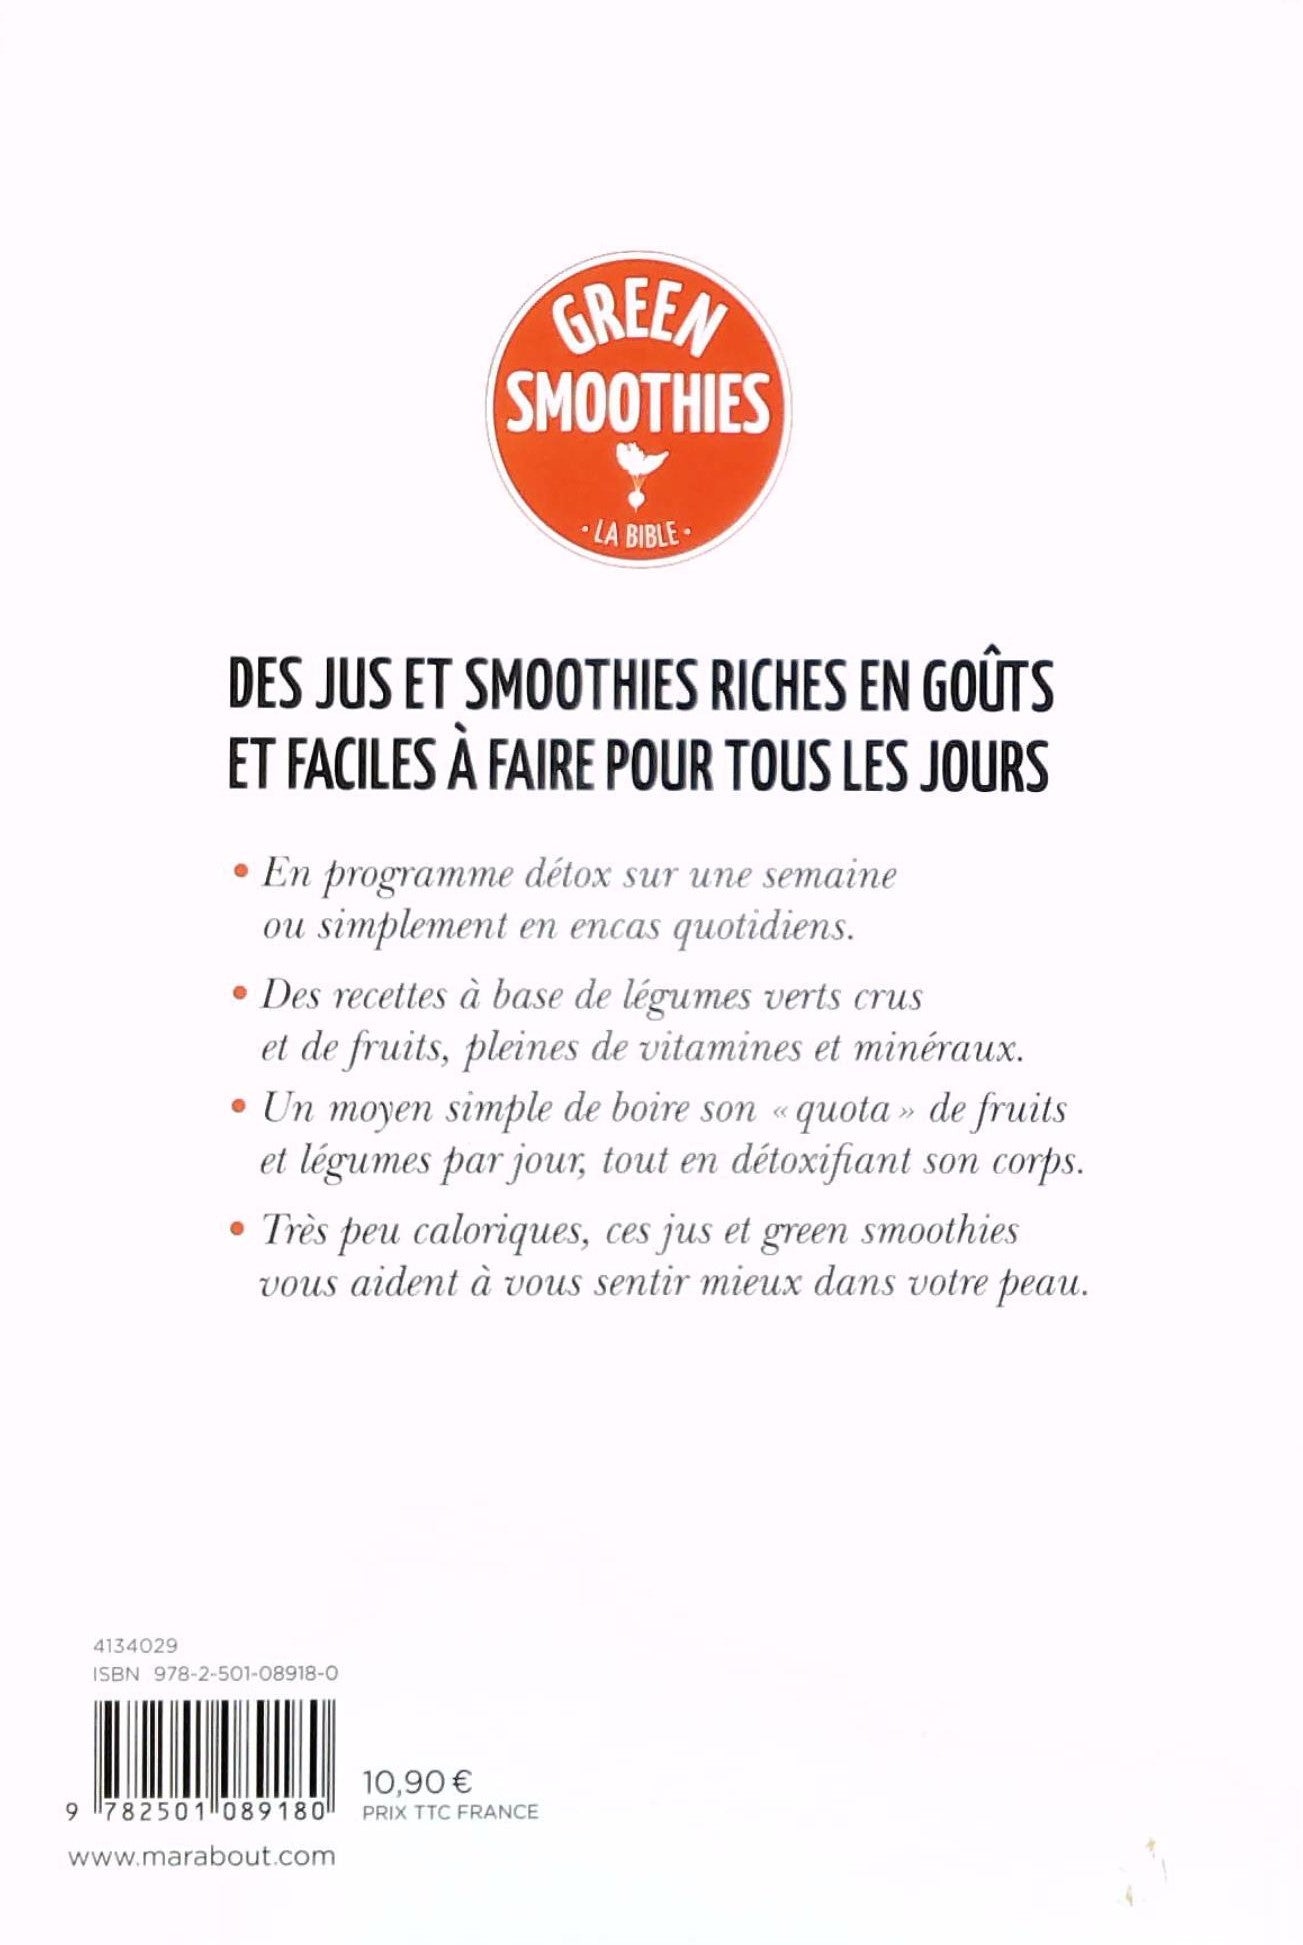 Green Smoothies - La bible : Boosters et tonifiants naturels mais in New-York (Fern Green)